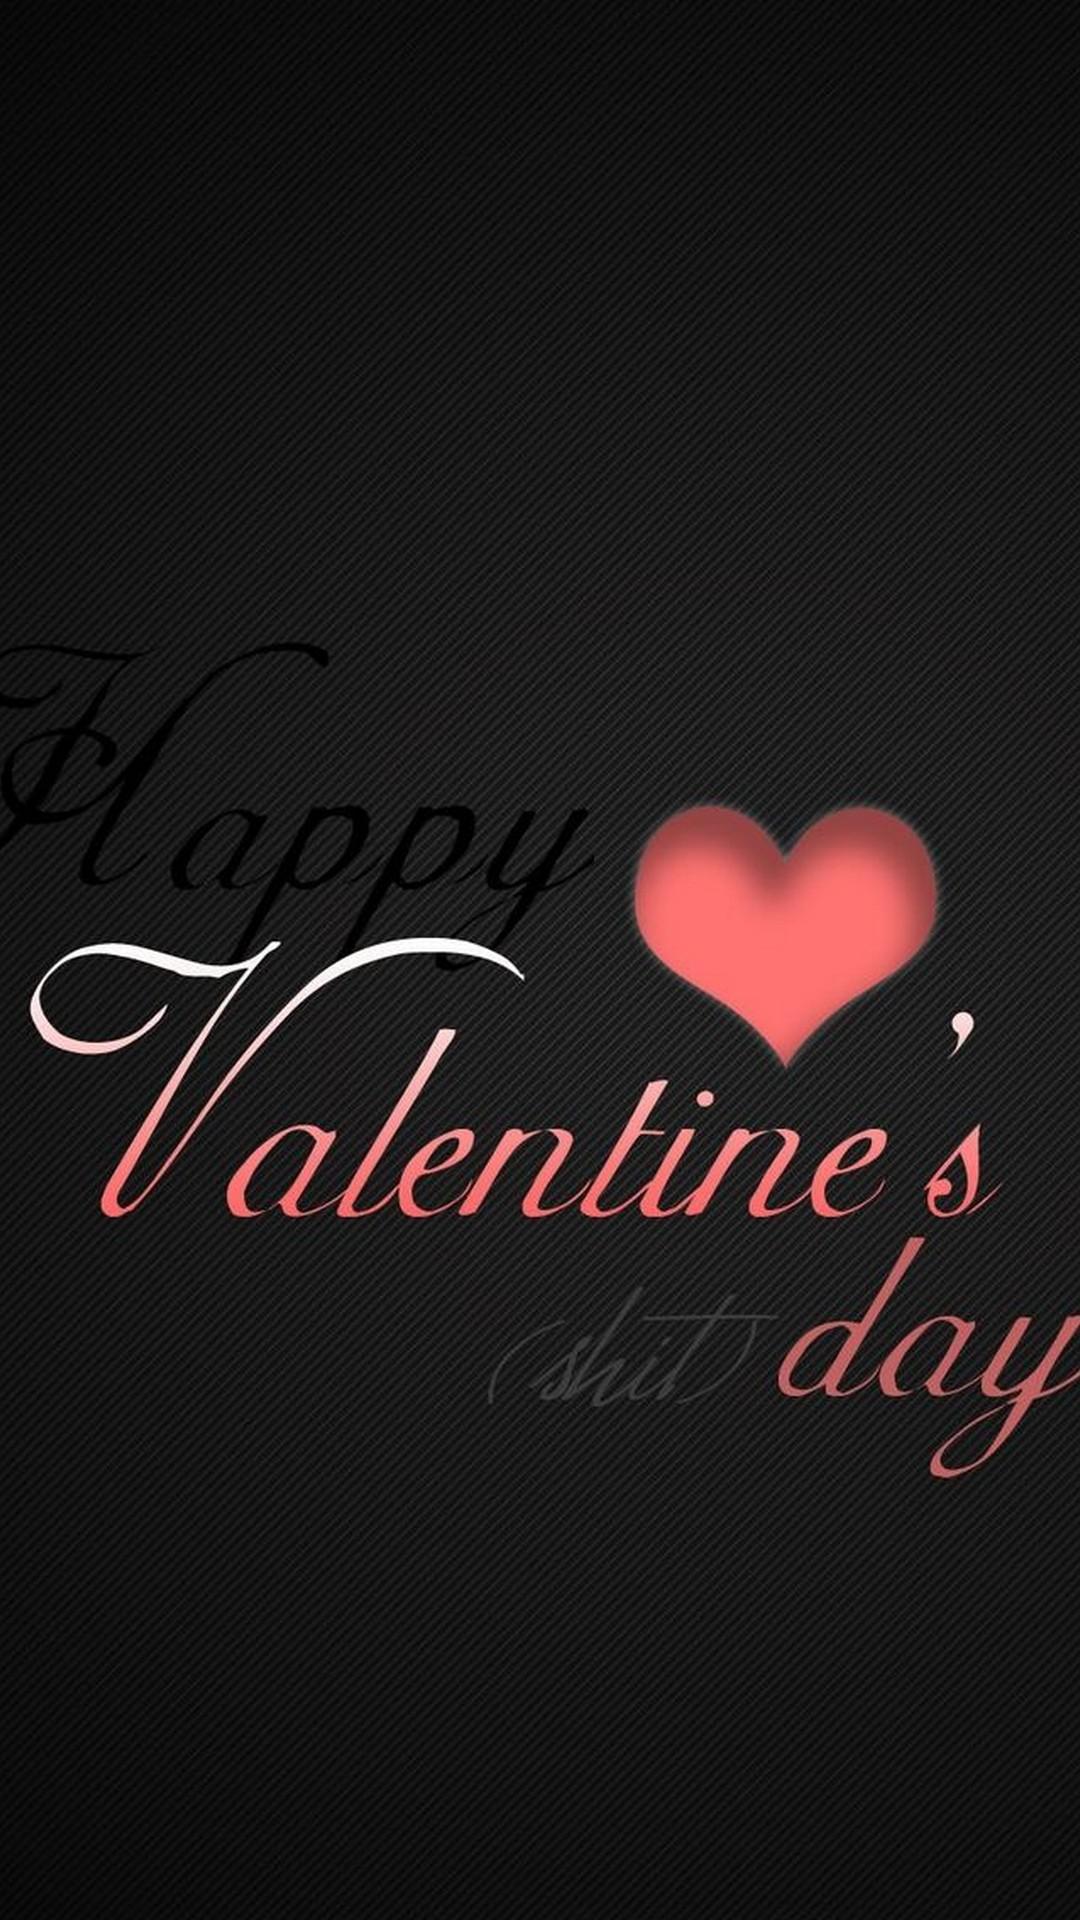 Happy Valentines Day Image Wallpaper Android Android